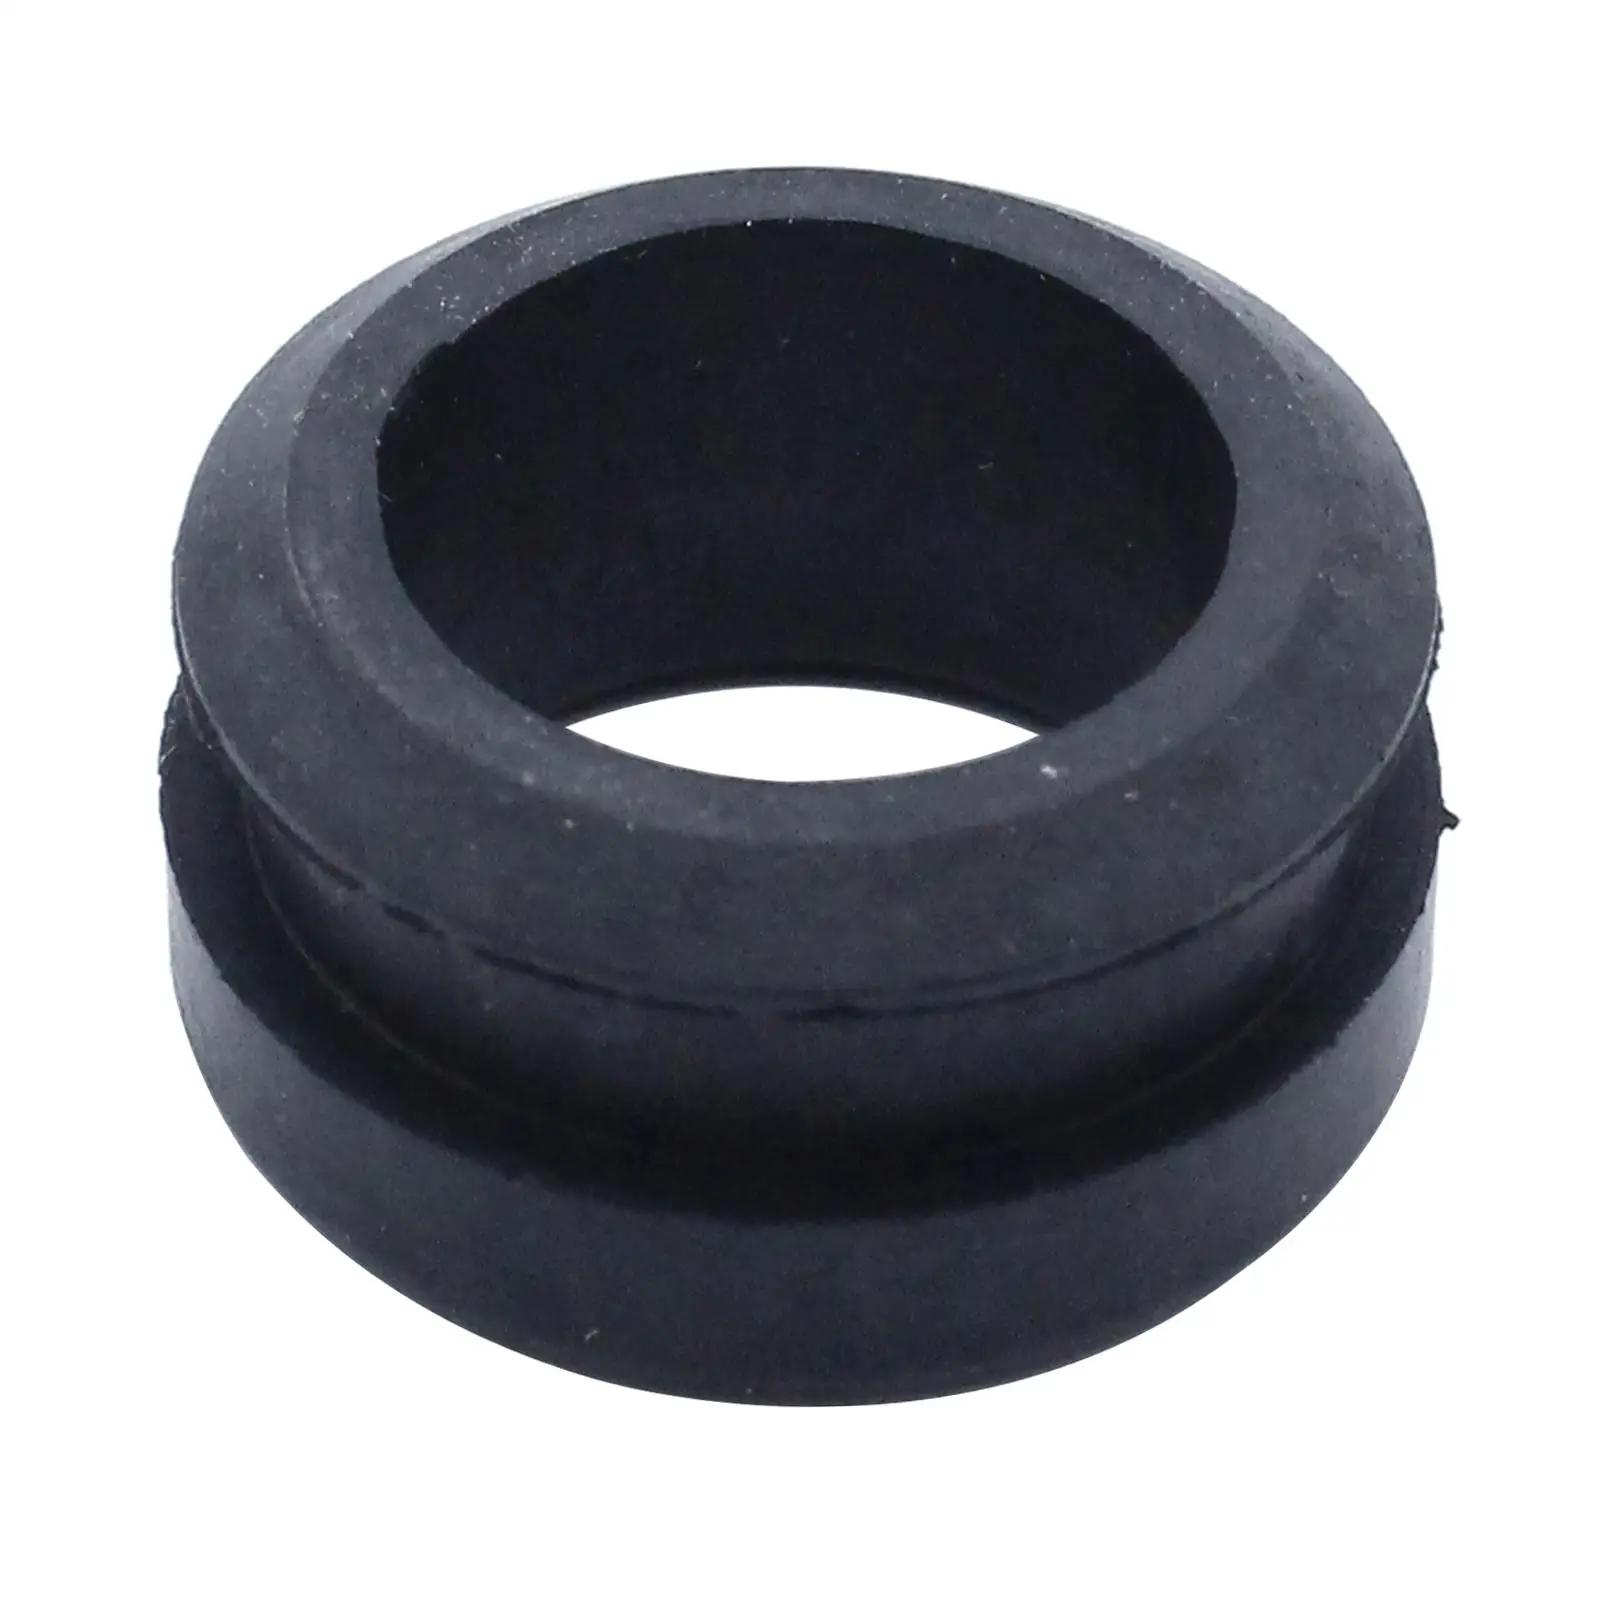 Rubber Breather Grommets, Cover Grommets, O.D. 1 1/4